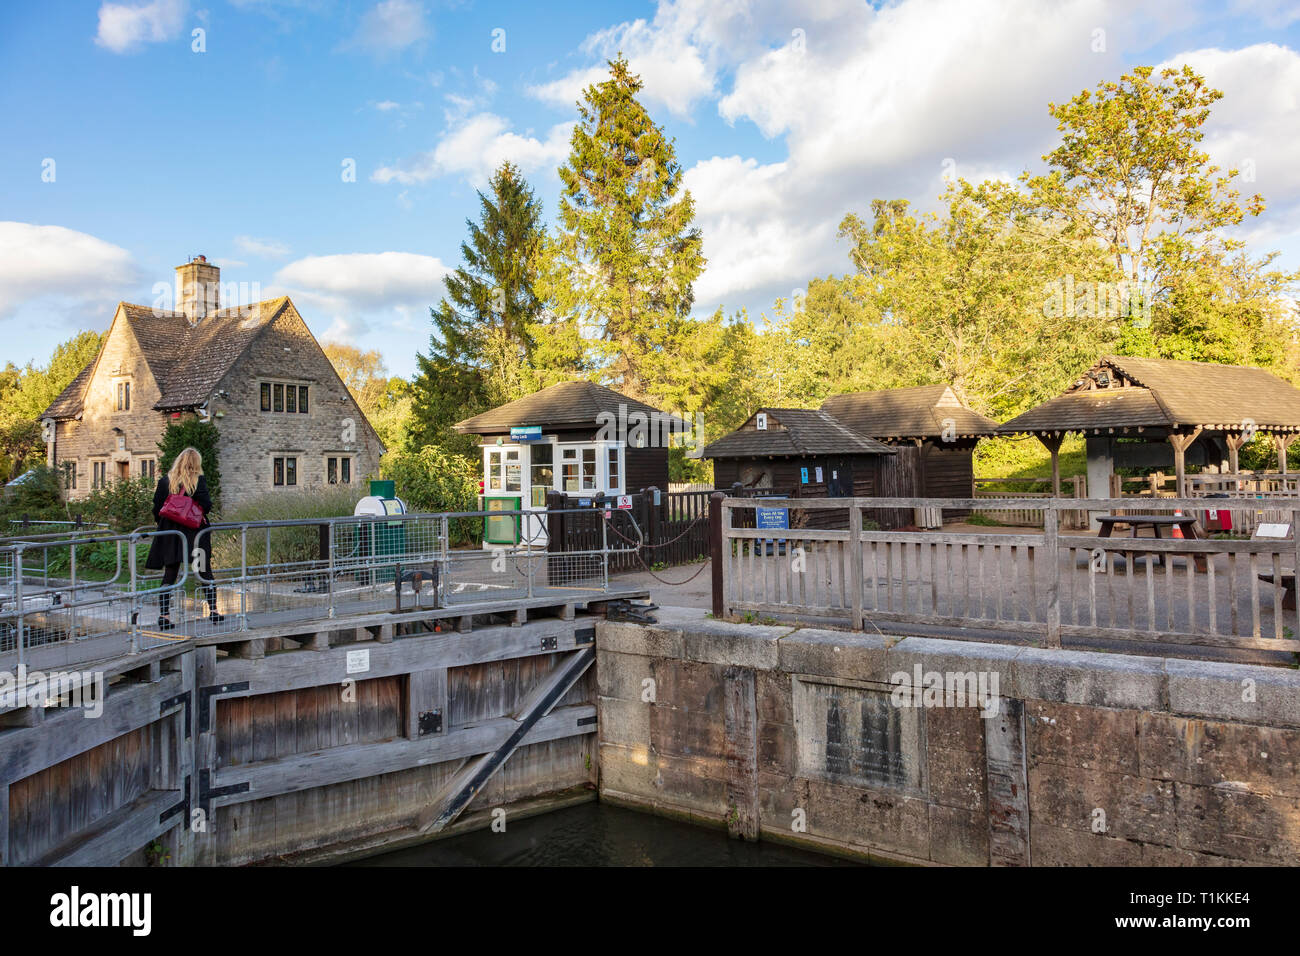 A blonde woman crosses the lock gates at Iffley Lock, Oxford, Oxfordshire, UK on the River Thames Stock Photo